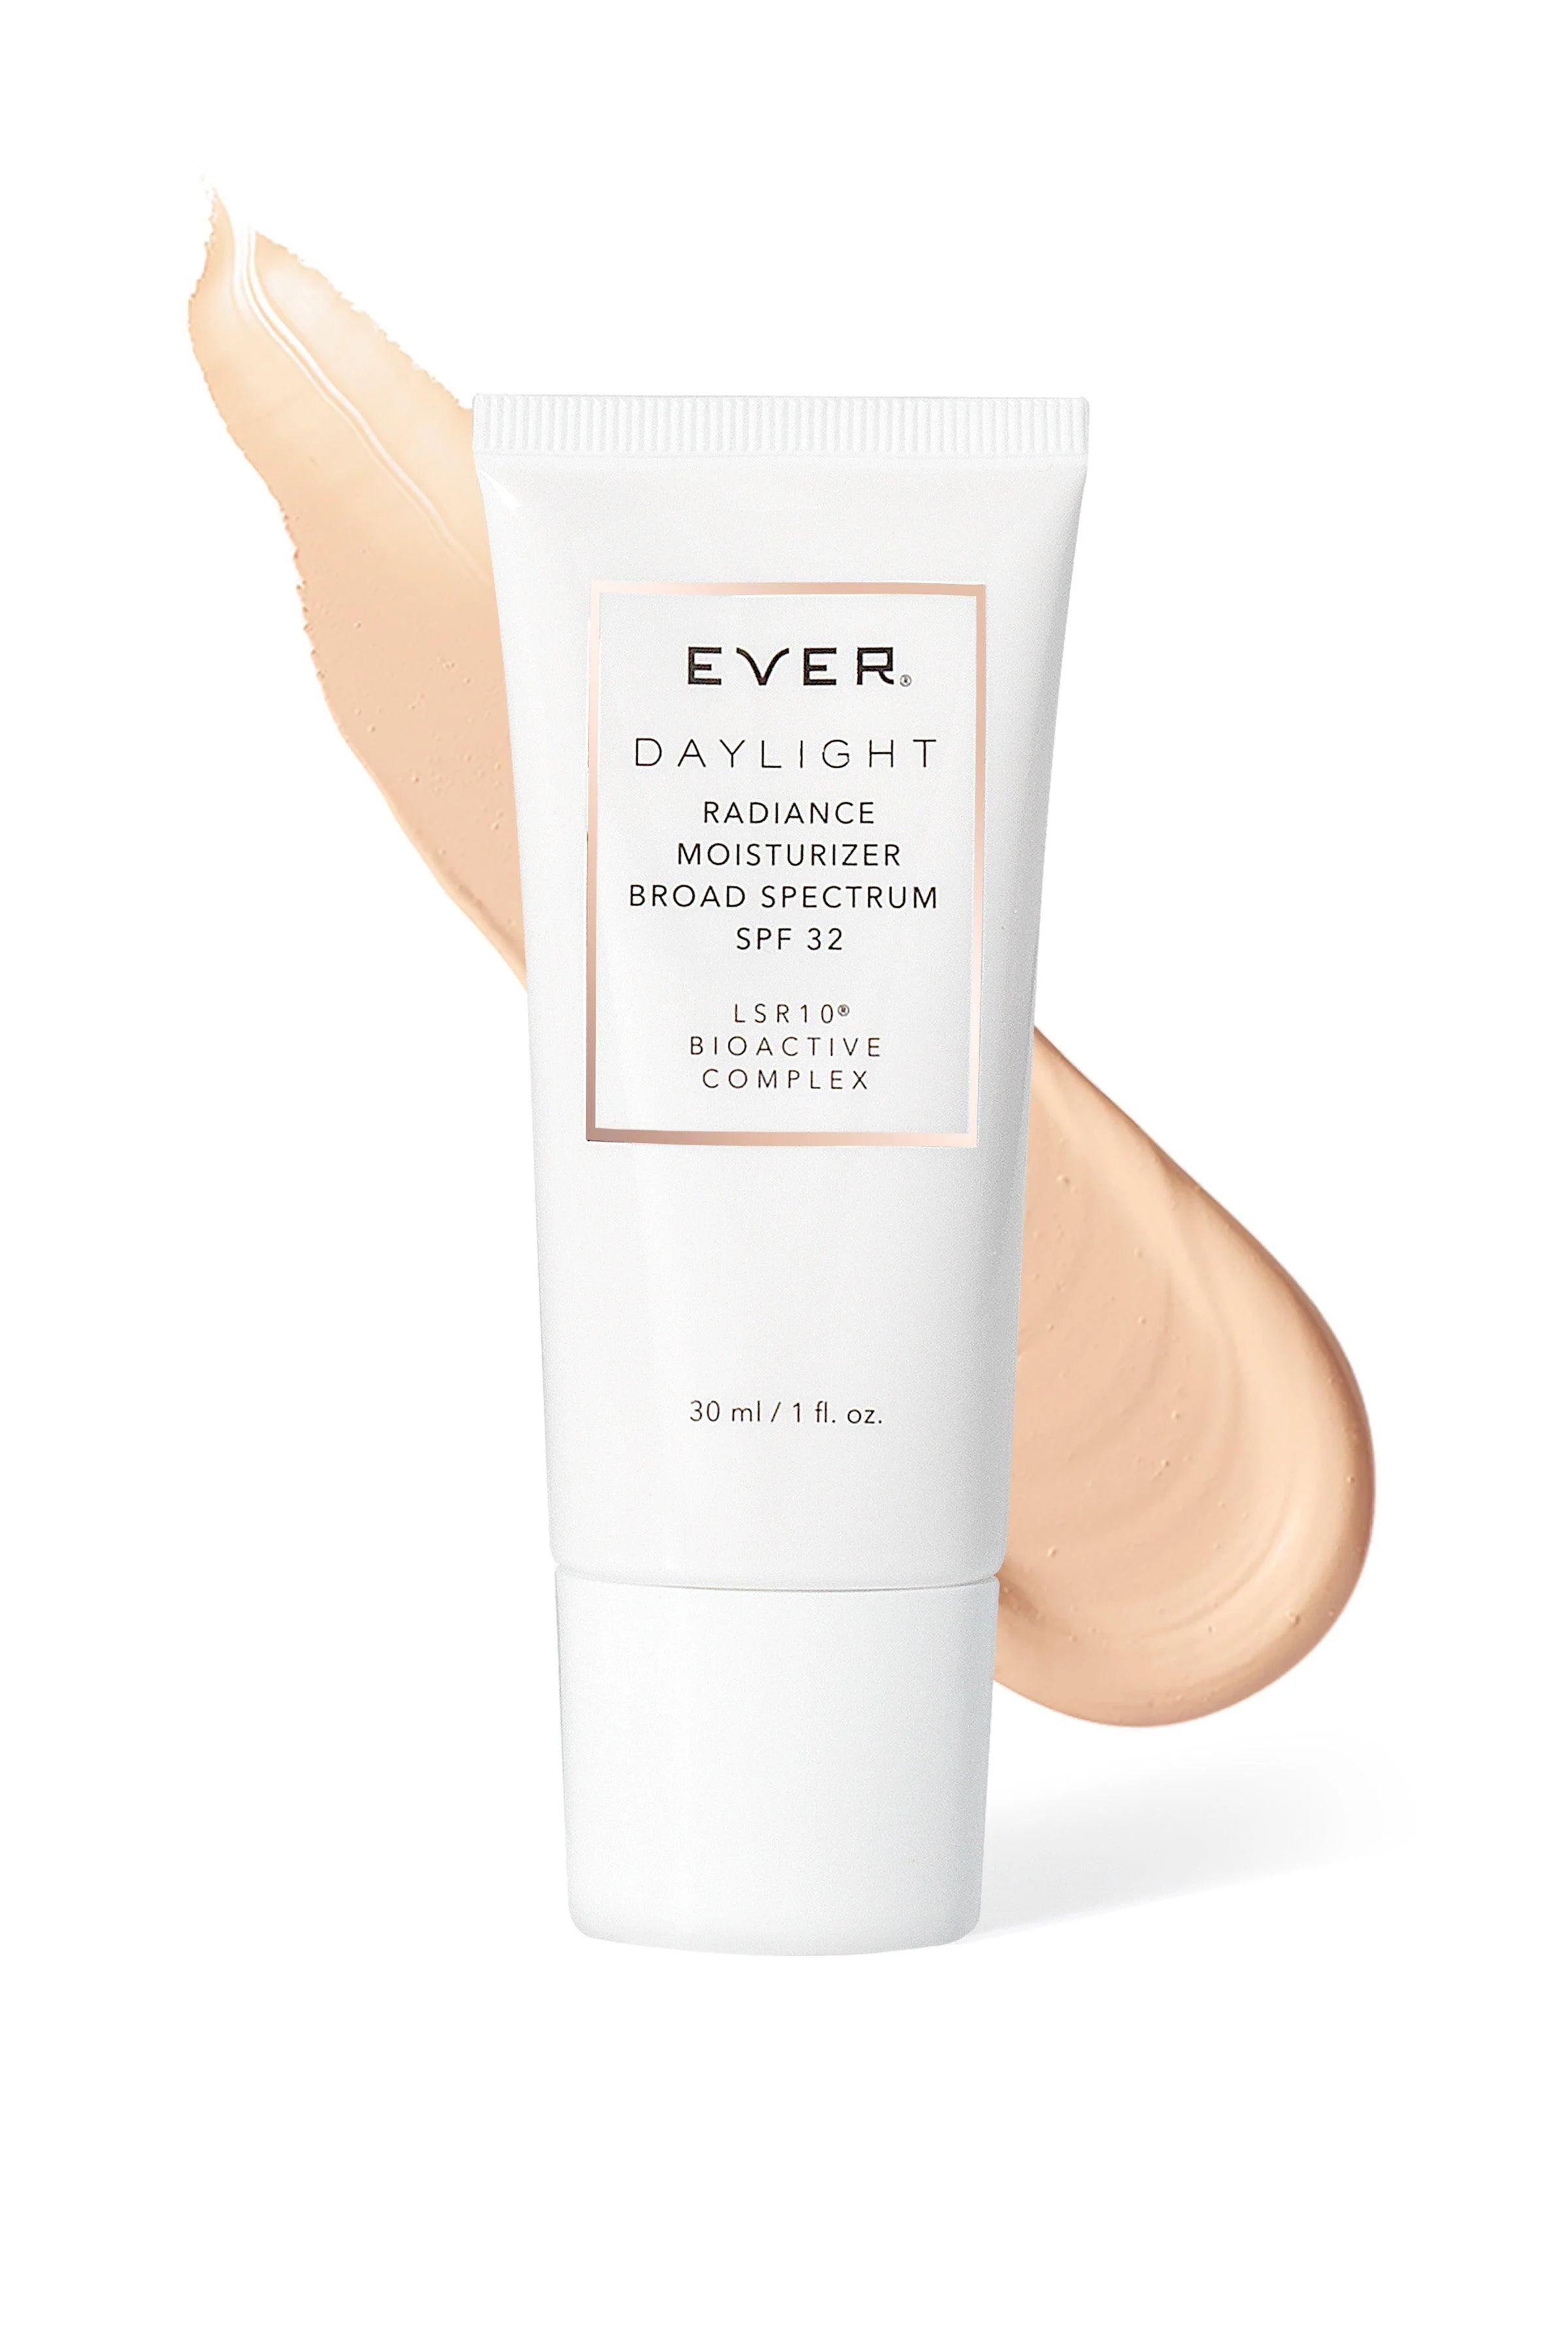 DAYLIGHT Radiance Tinted Moisturizer Broad Spectrum Sunscreen SPF 32 with LSR10® | EVER Skincare